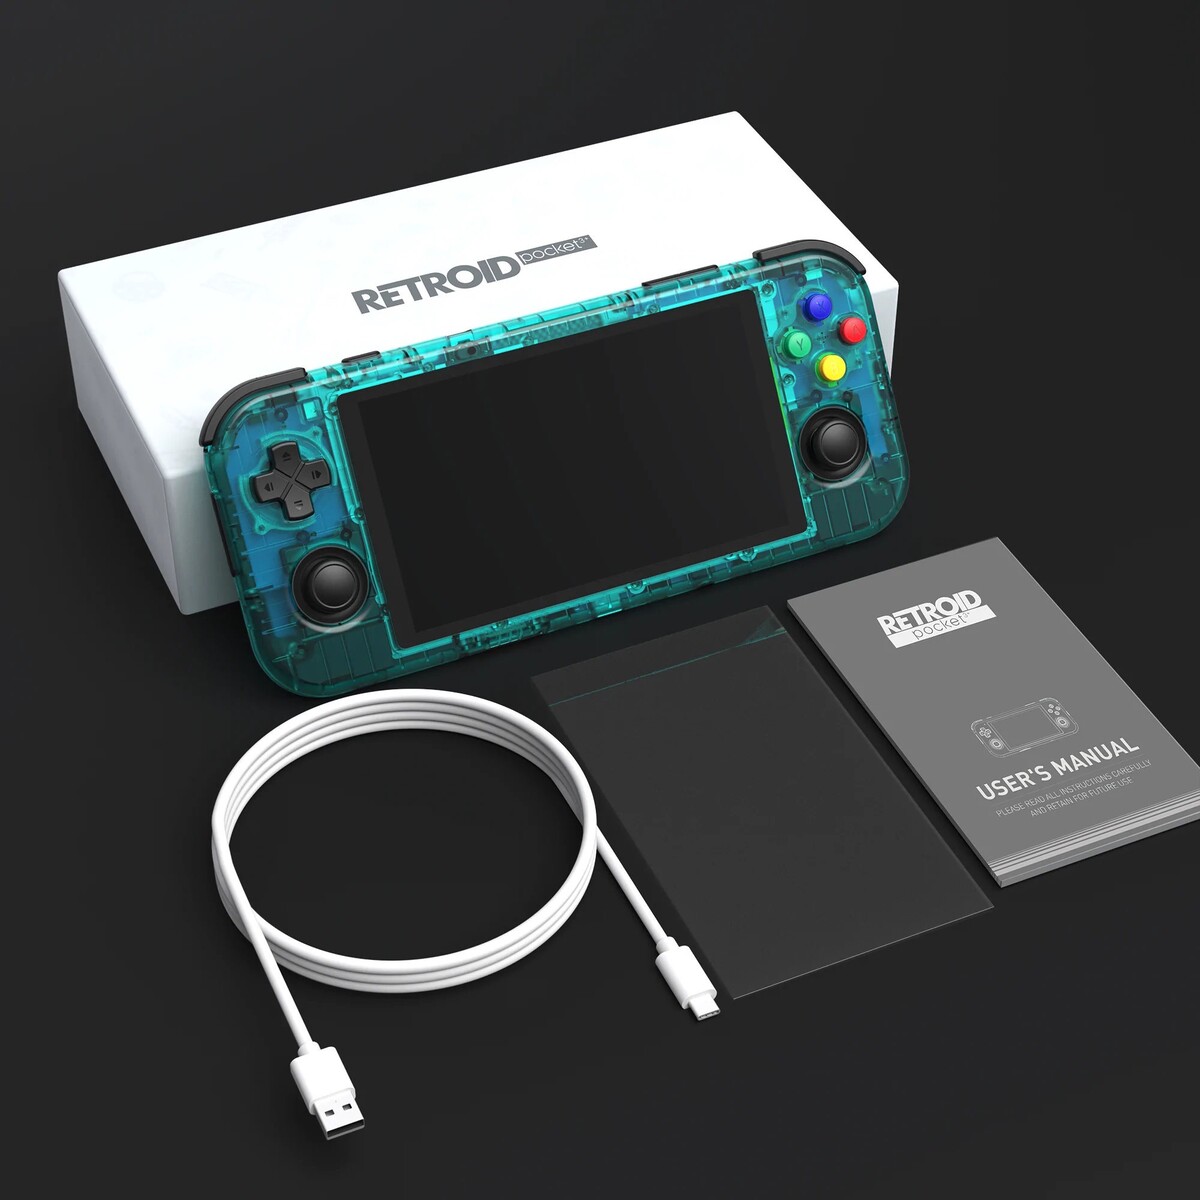 Retroid Pocket 3+ launches with performance upgrades in multiple